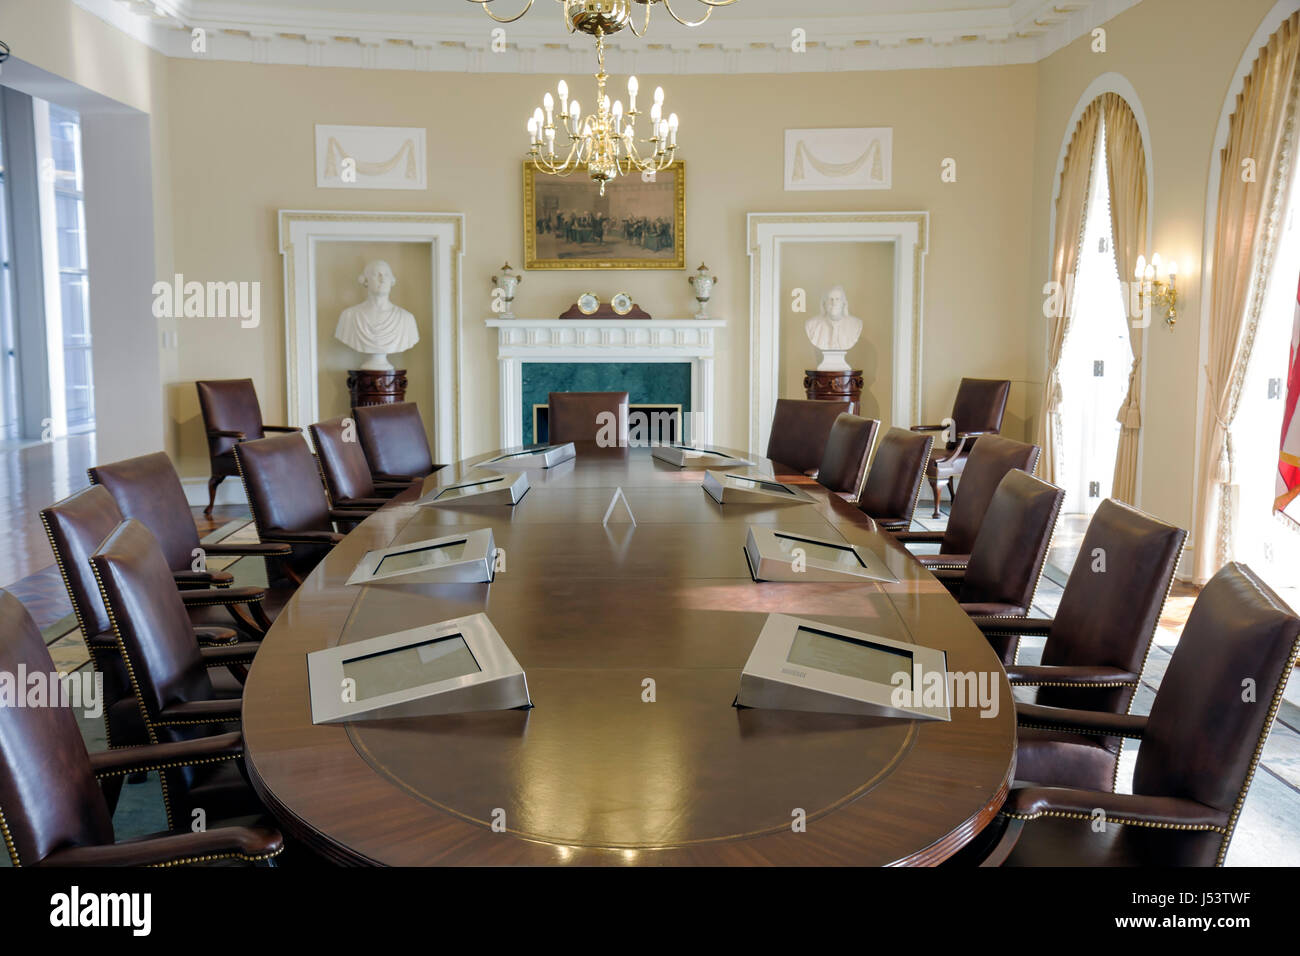 Little Rock Arkansas,William J. Clinton Presidential Library,full scale replica Cabinet Room,conference table,chairs,exhibit exhibition collection gov Stock Photo